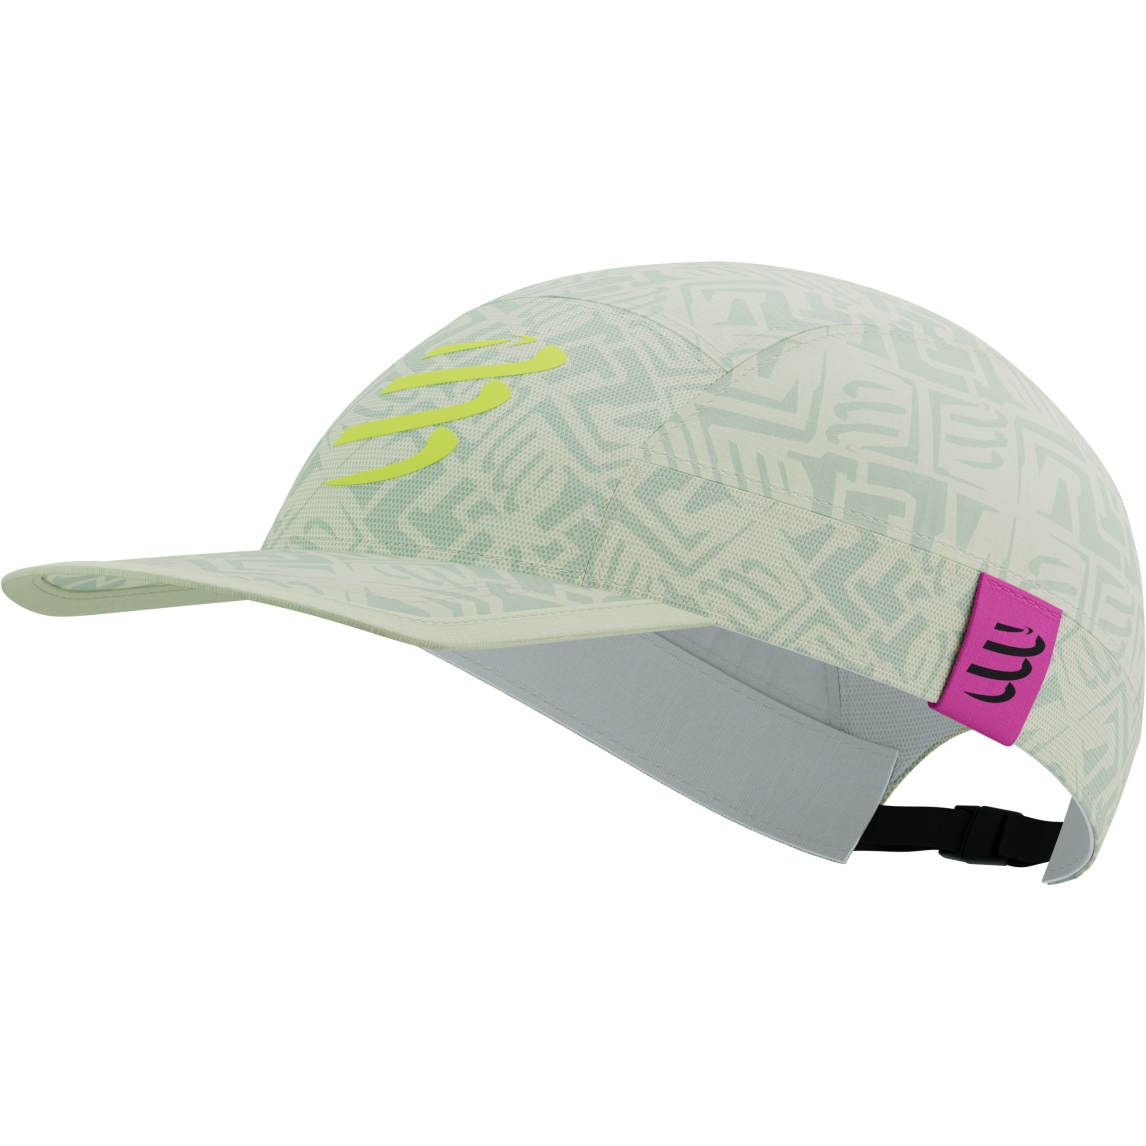 Picture of Compressport 5 Panel Light Cap - sugar swizzle/ice flow/safety yellow